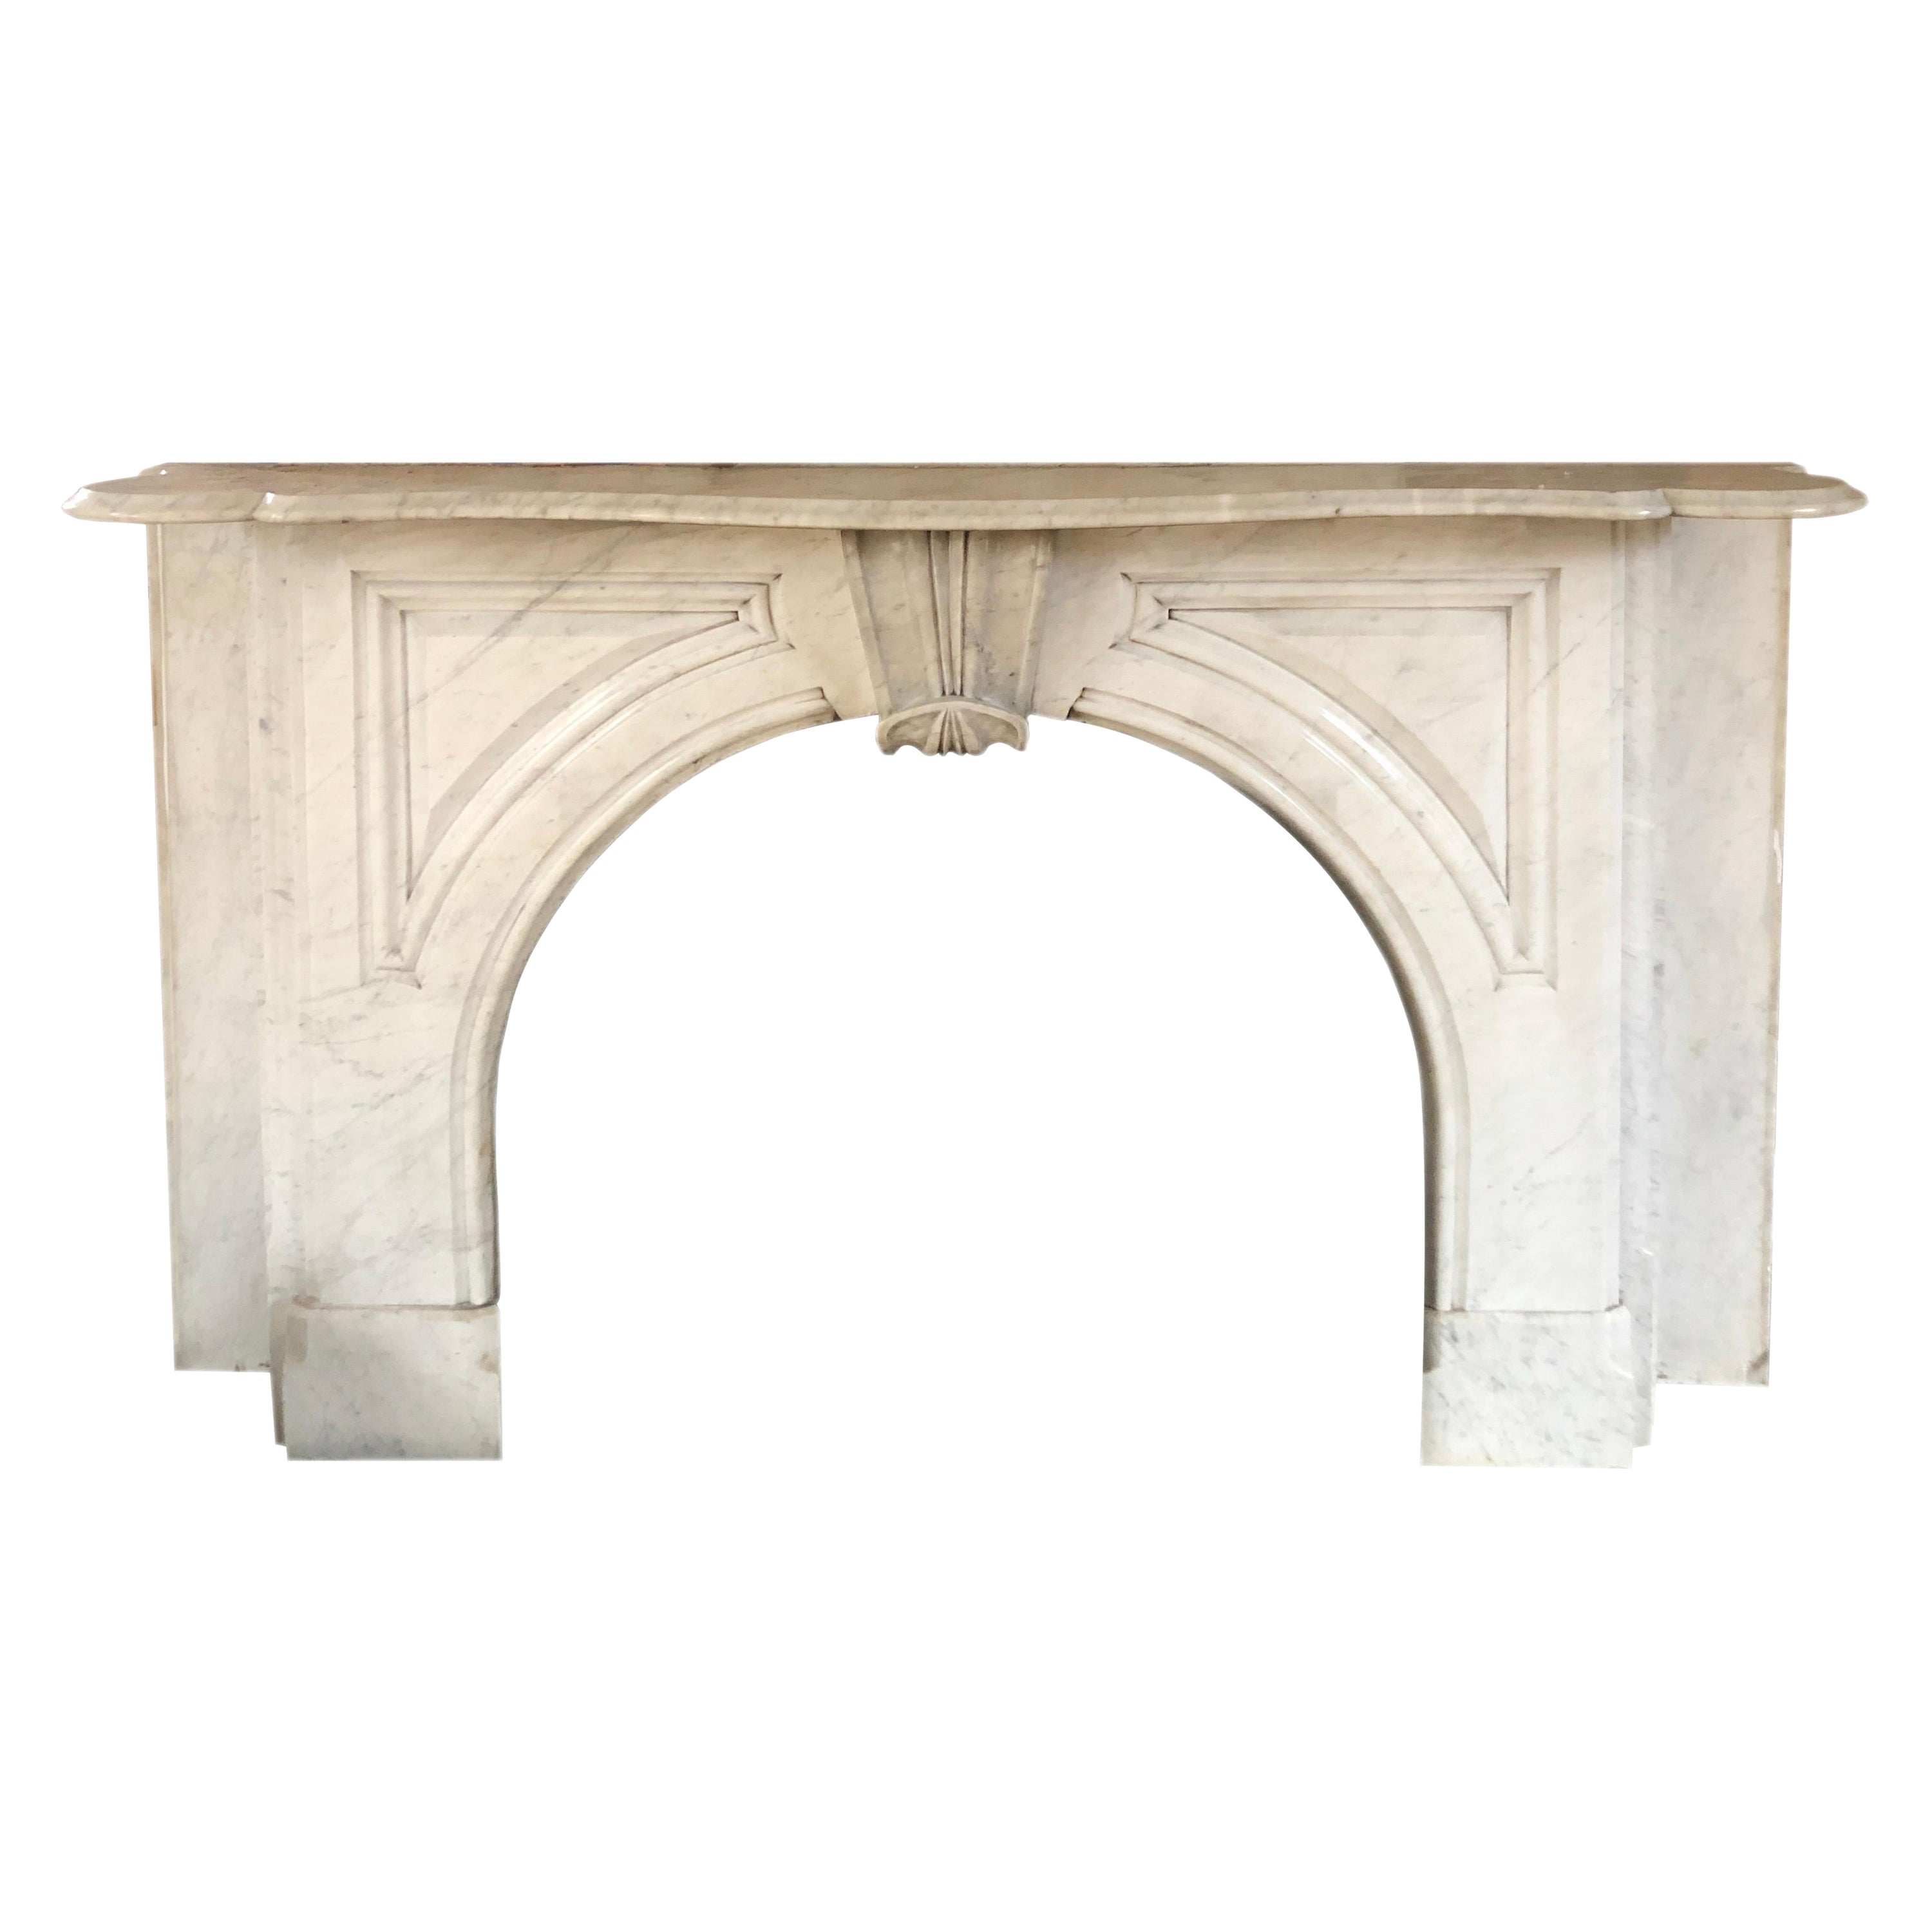 19th Century Victorian Arched Carrara Marble Mantel, Crated for Shipment